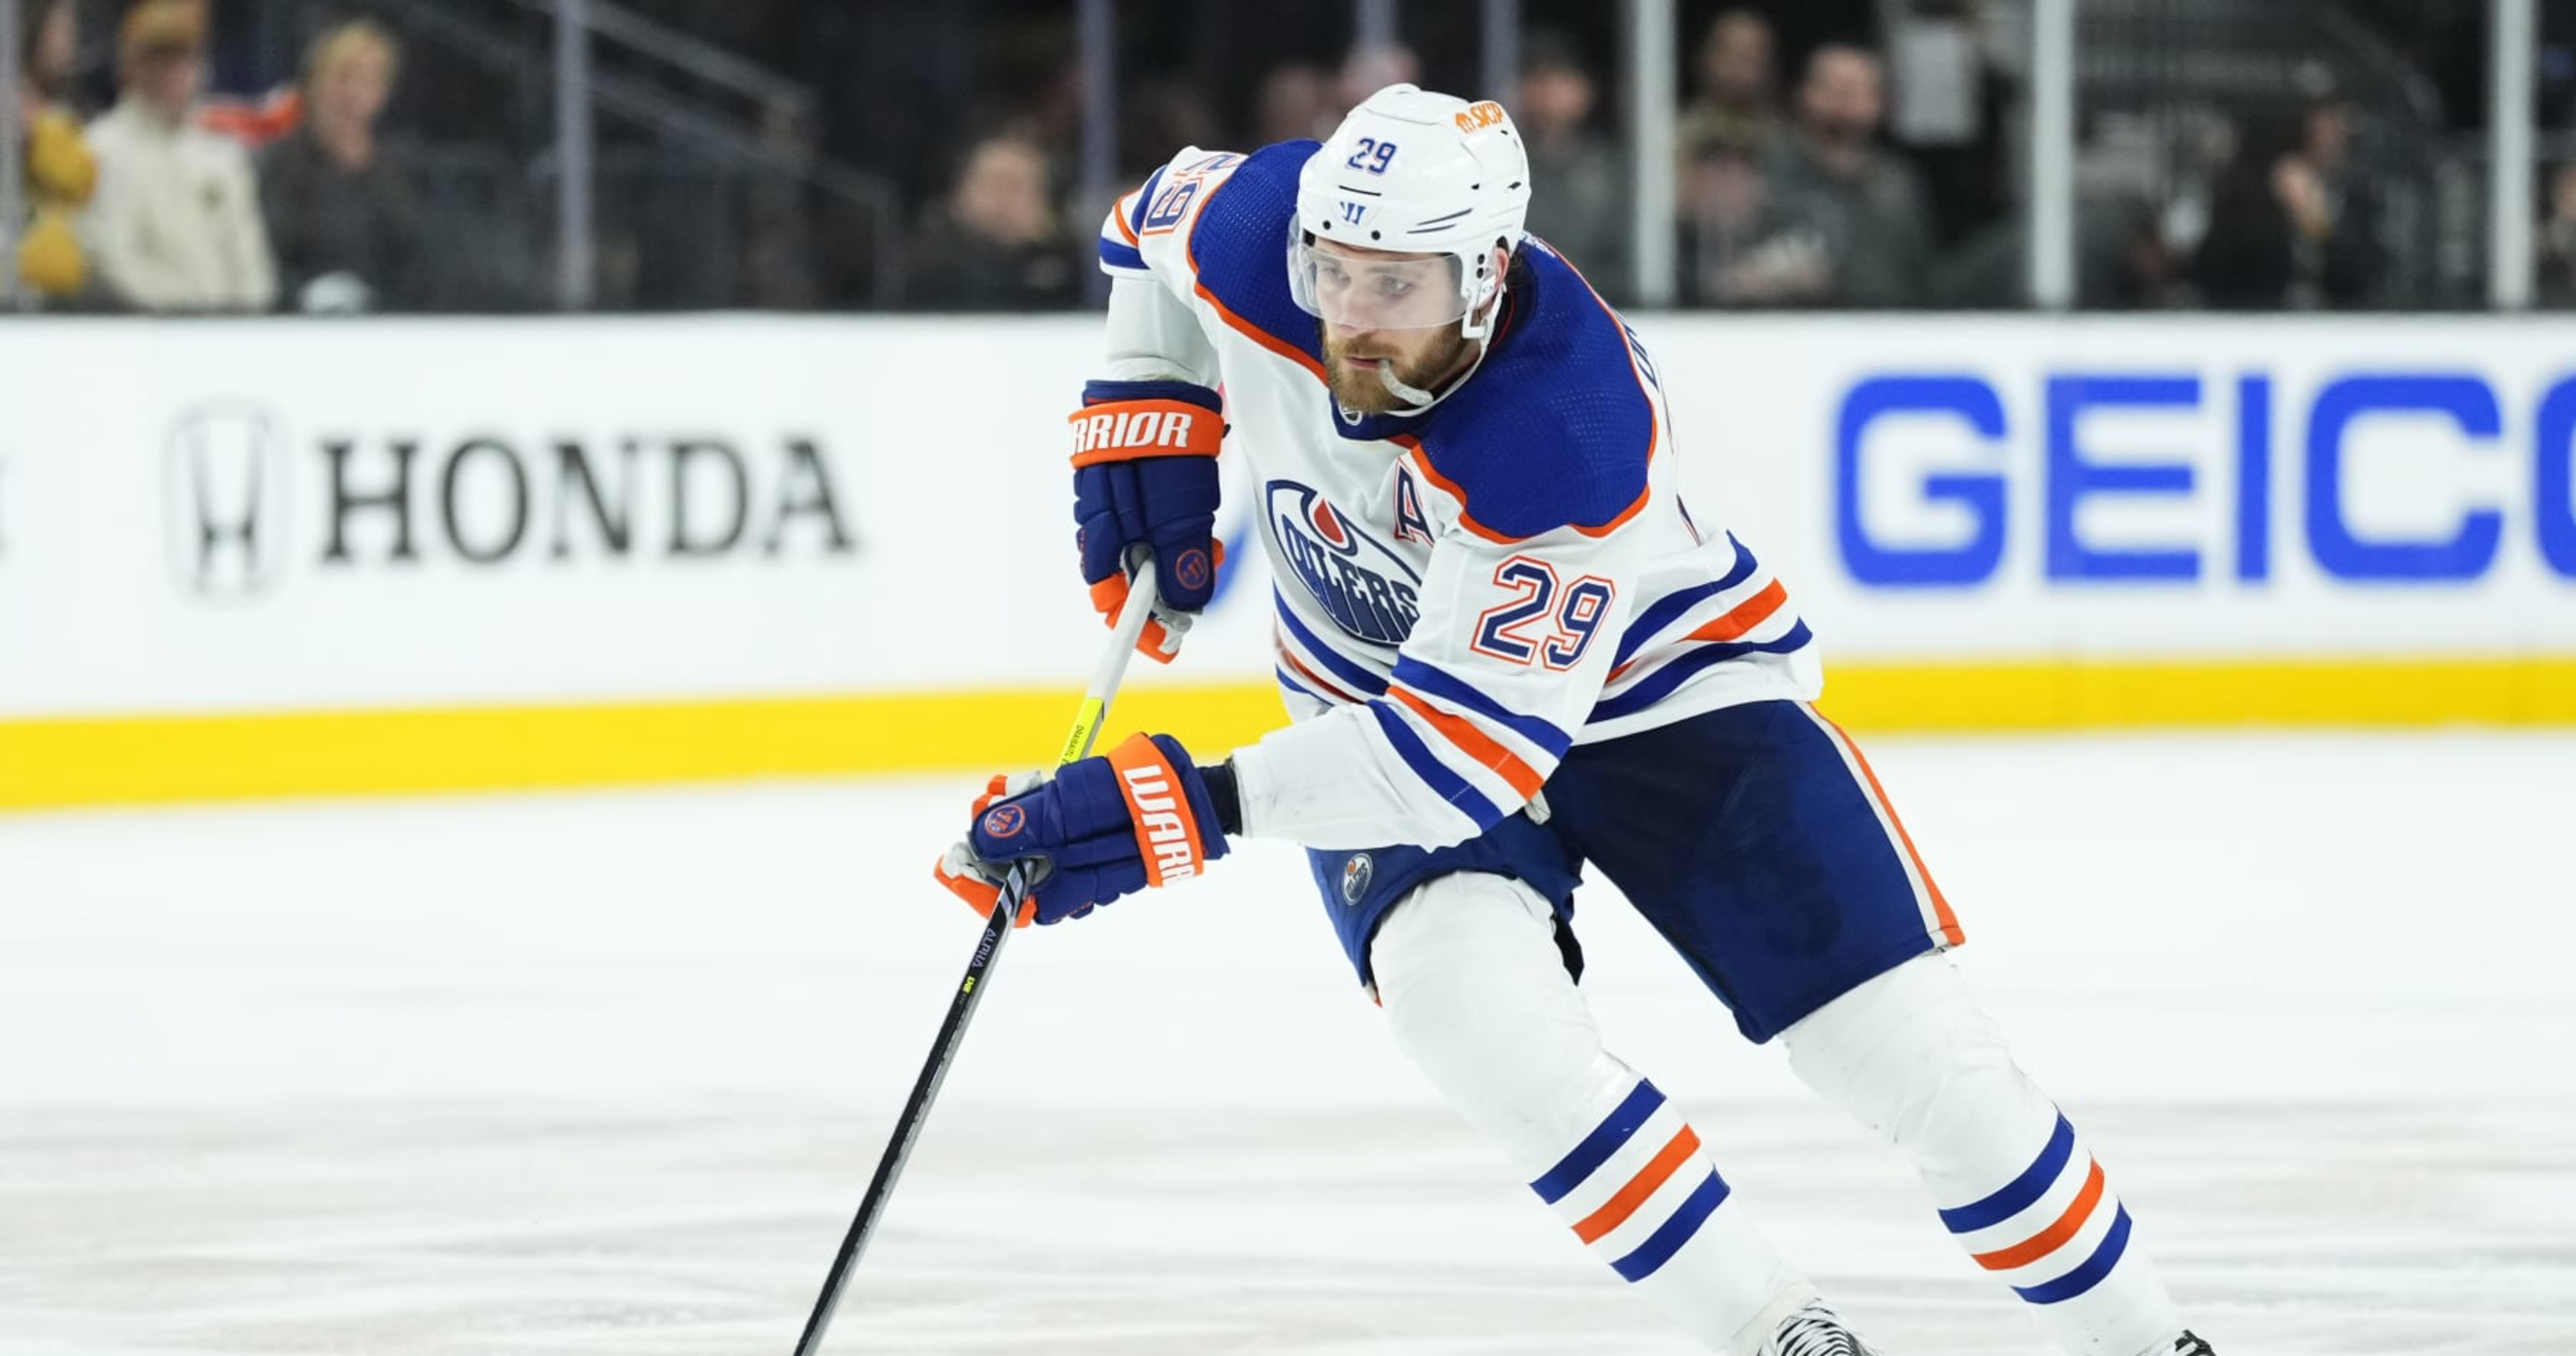 Leon Draisaitl Pitied by Fans After 4 Goals as McDavid, Oilers Lose to ...